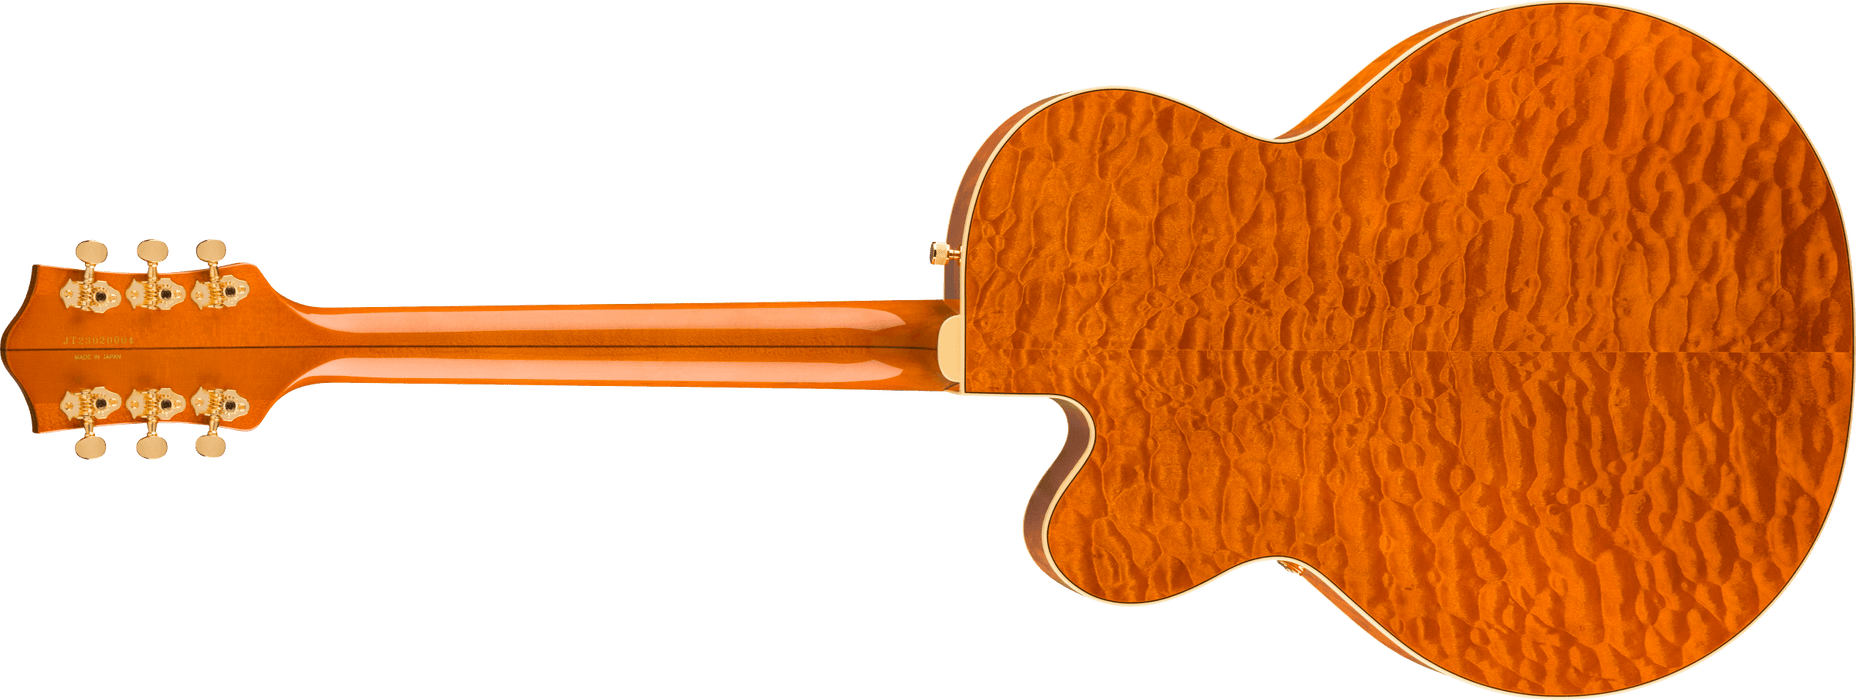 G6120TGQM-56 Limited Edition Quilt Classic Chet Atkins Hollow Body with Bigsby, Roundup Orange Stain Lacquer - Fair Deal Music